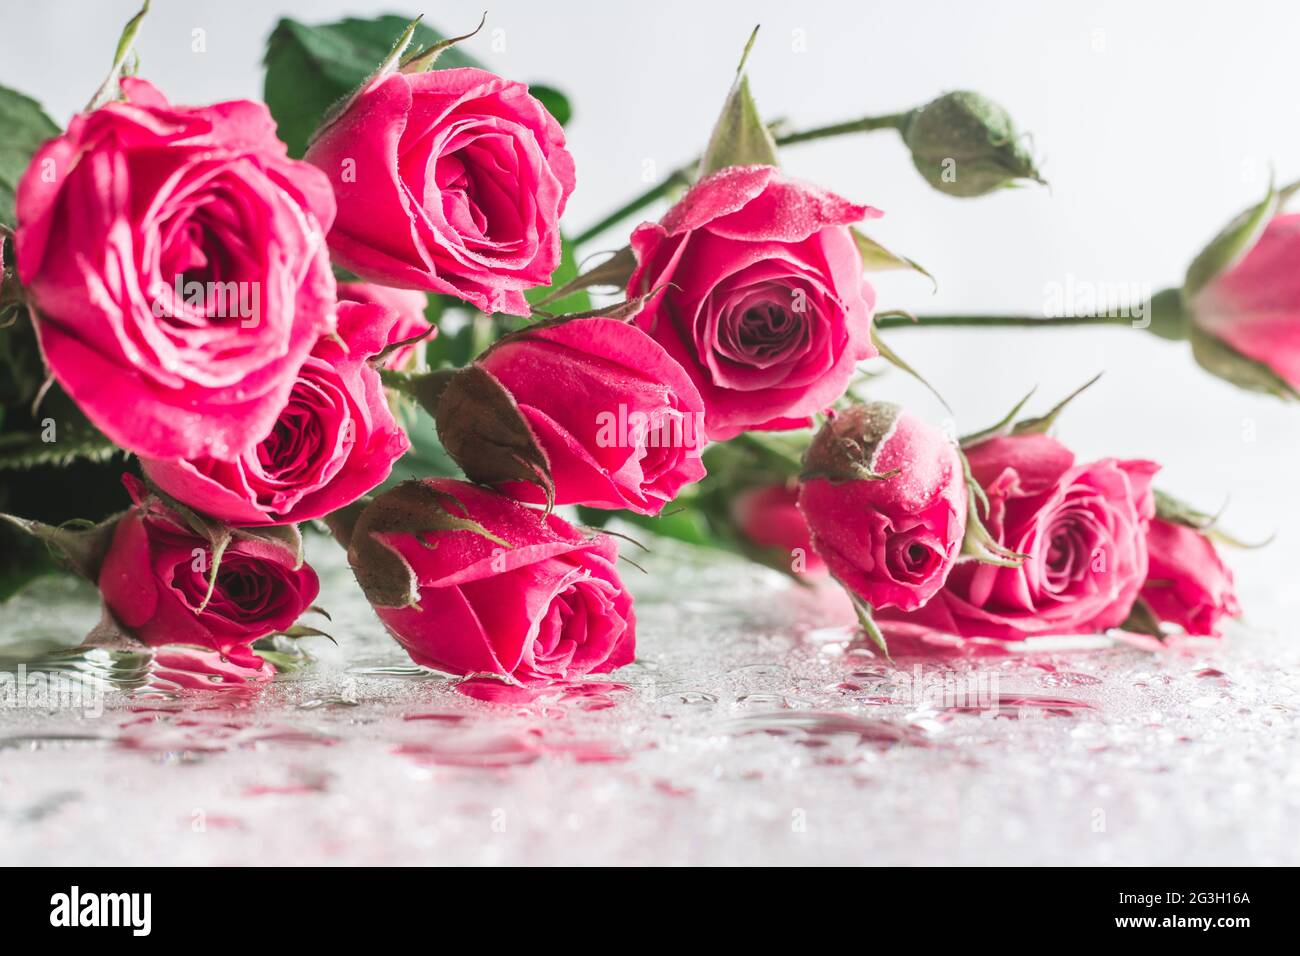 Blurred creative background of pink rose flowers. Partially ...